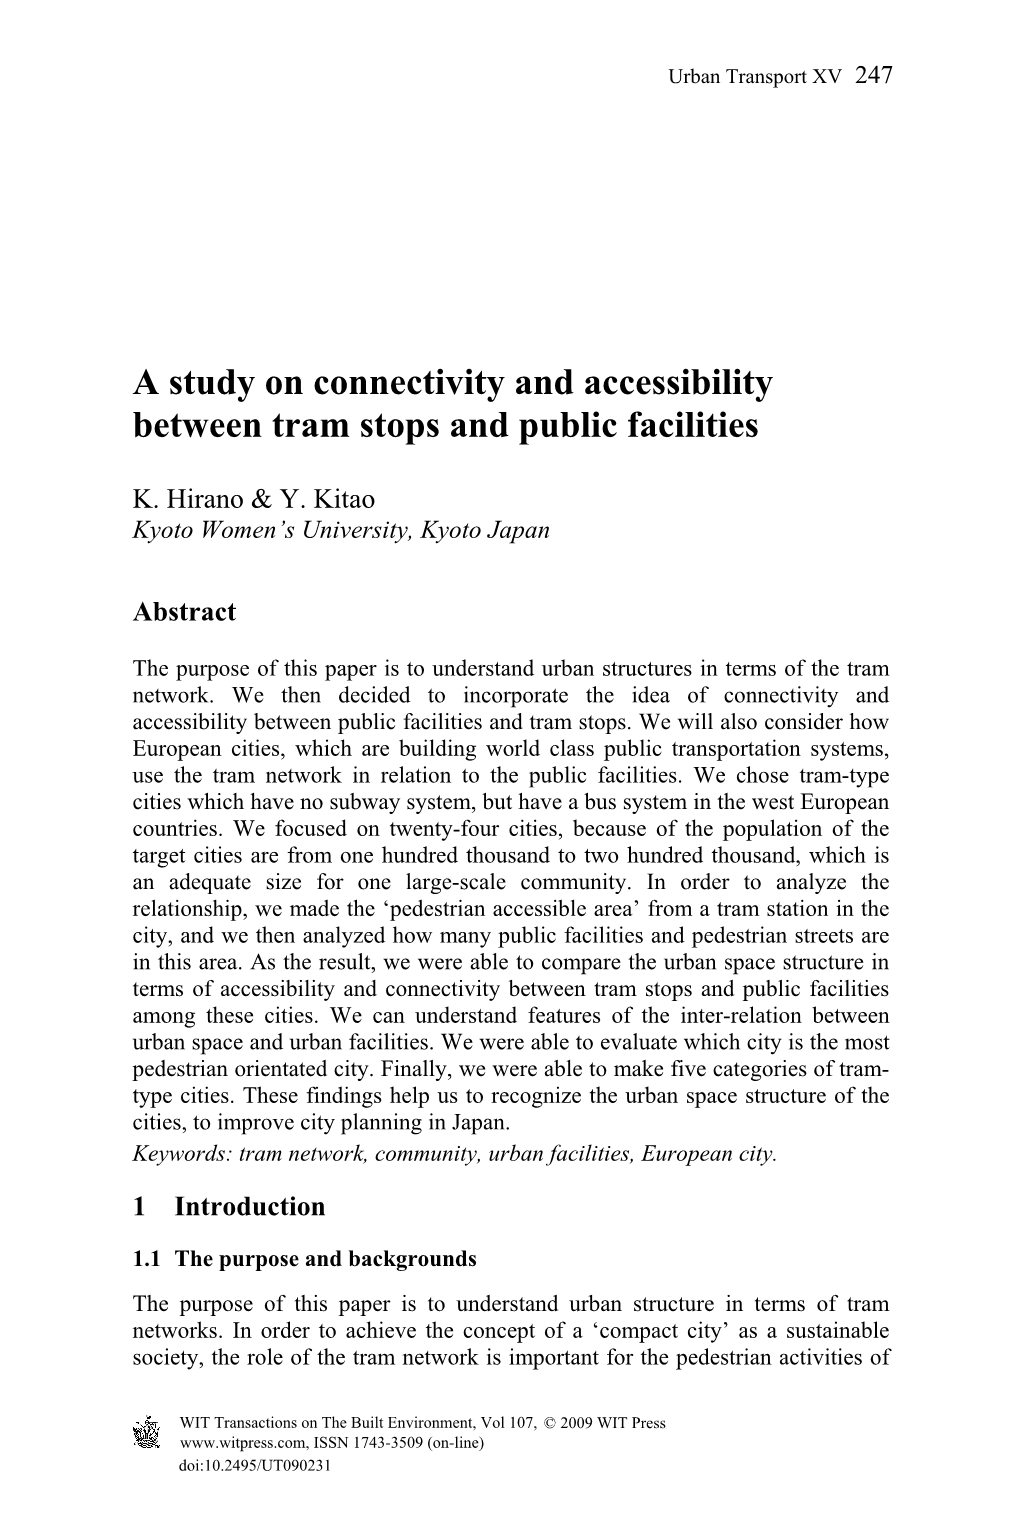 A Study on Connectivity and Accessibility Between Tram Stops and Public Facilities